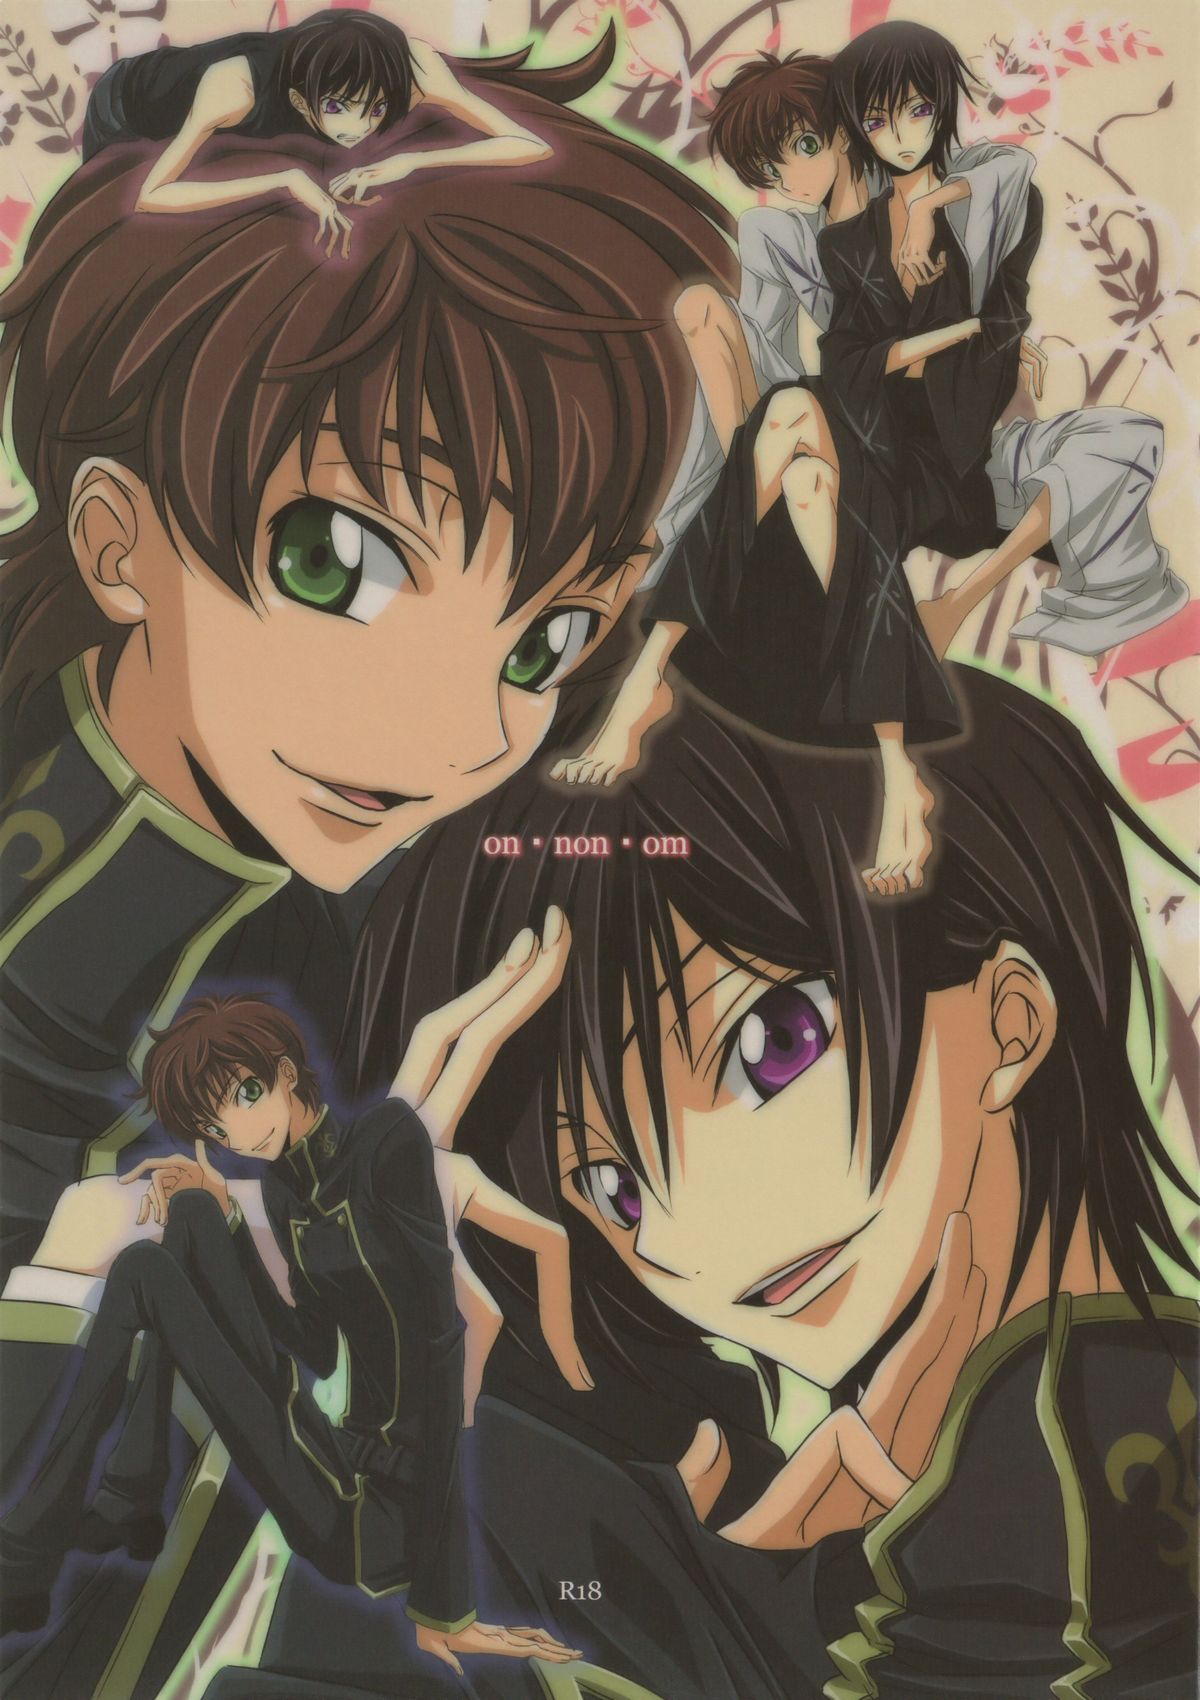 [Cou] on・non・om (Code Geass) page 1 full